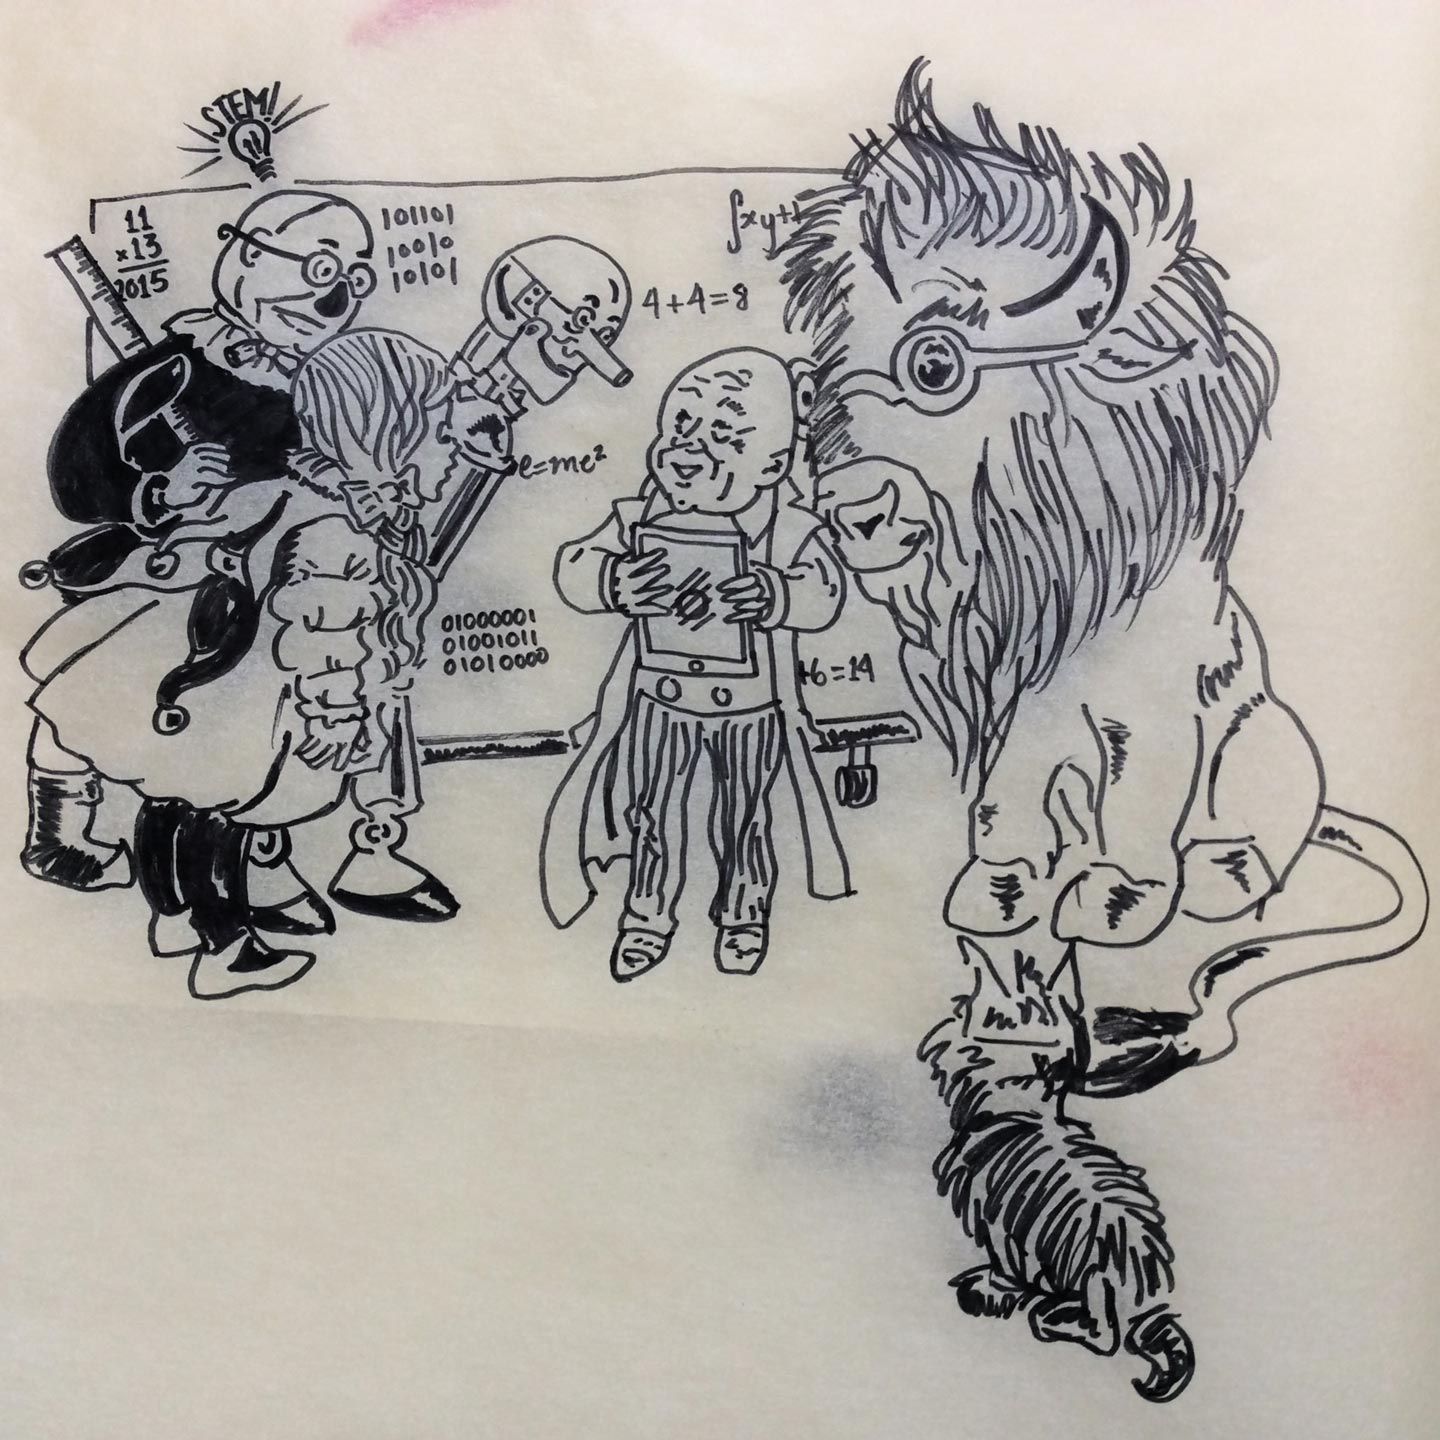 Illustration of Wizard of Oz characters with a bison in place of the lion on tracing paper